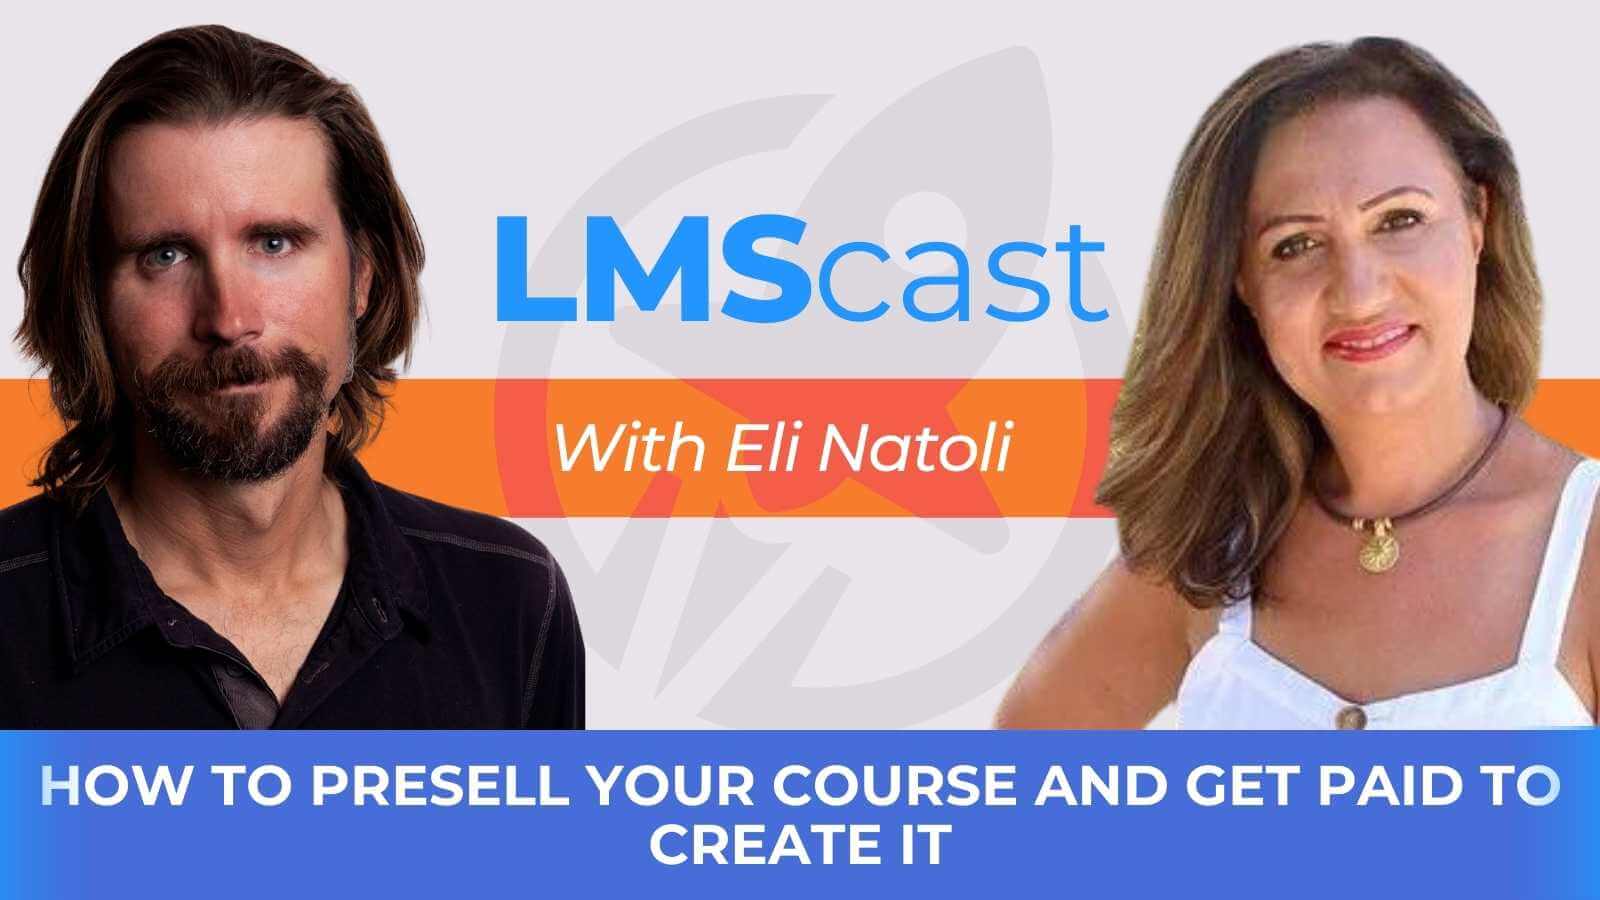 How to Presell Your Course and Get Paid to Create It with Eli Natoli